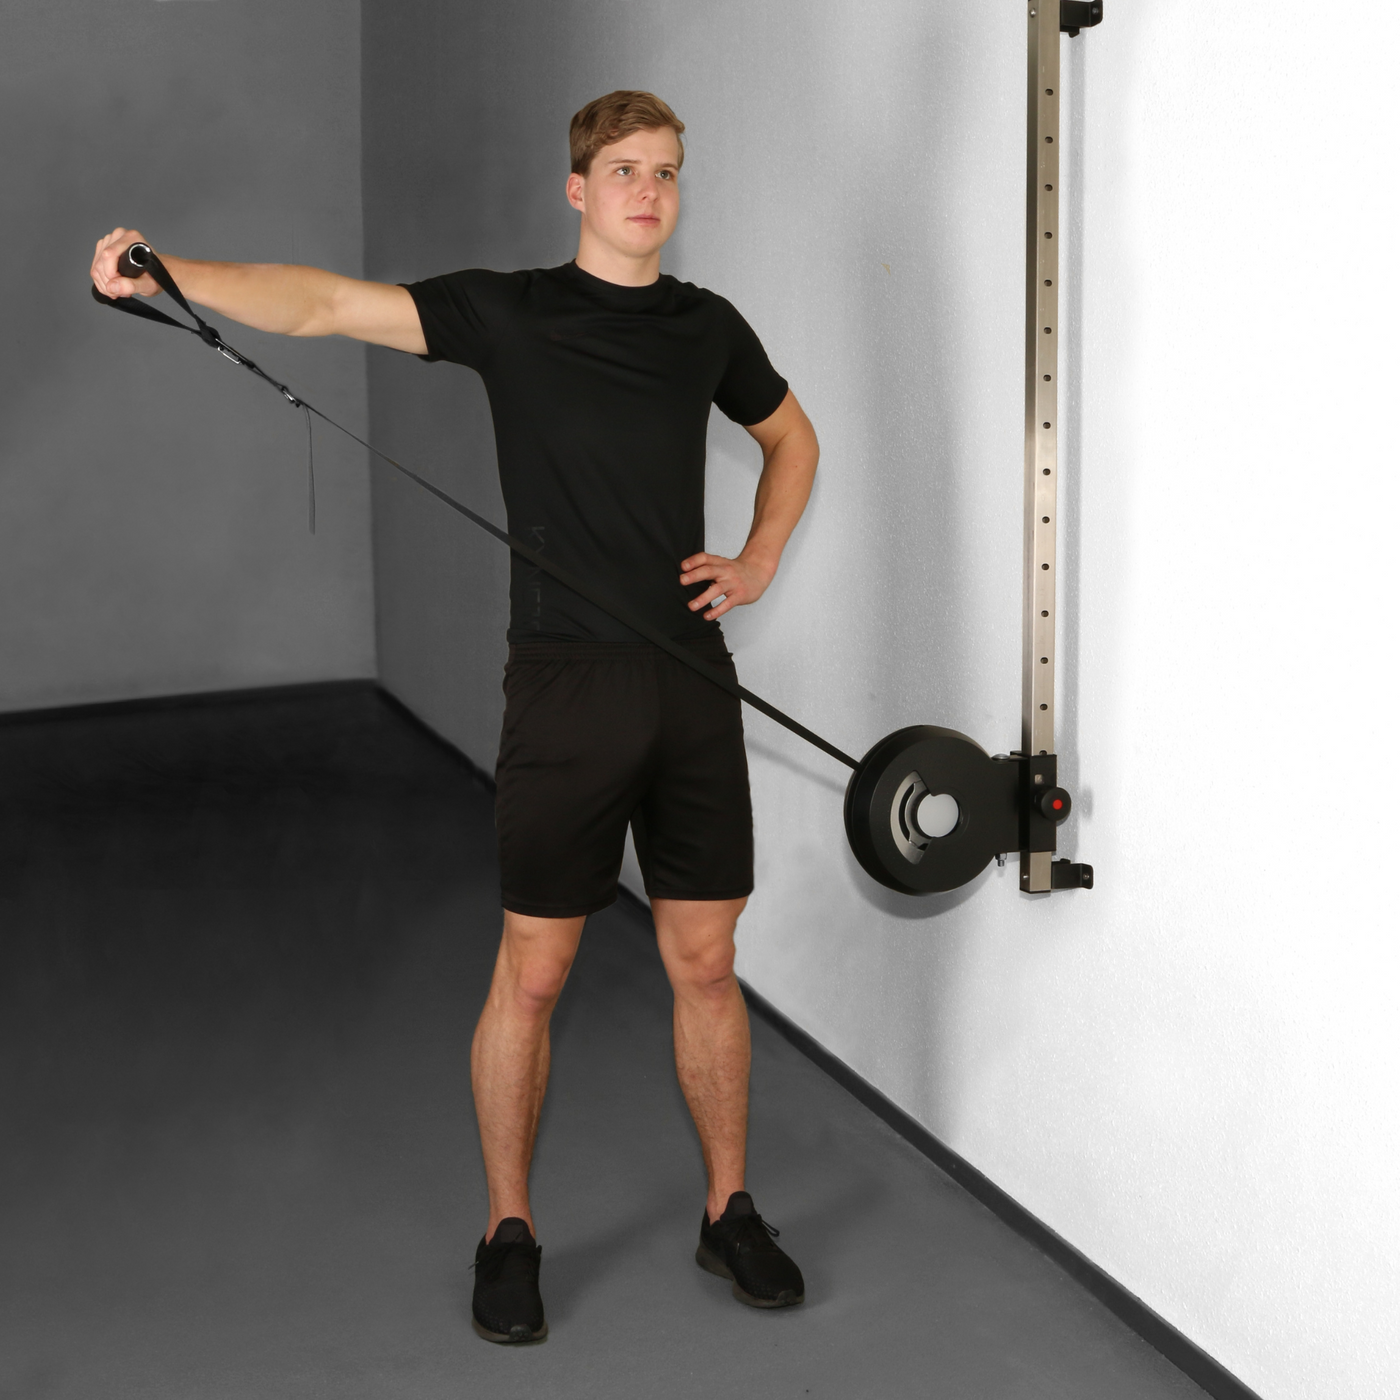 Kynett flywheel training one fly wheel training strength training Kynett home flywheel trainer workout exercise resistance training equipment eccentric overload stick product training box portable affiliate nadal arms eccentric training device inertia training squat machine isoinertial training workout stick rafael nadal muscles rafa nadal flywheel gym equipment pulley price